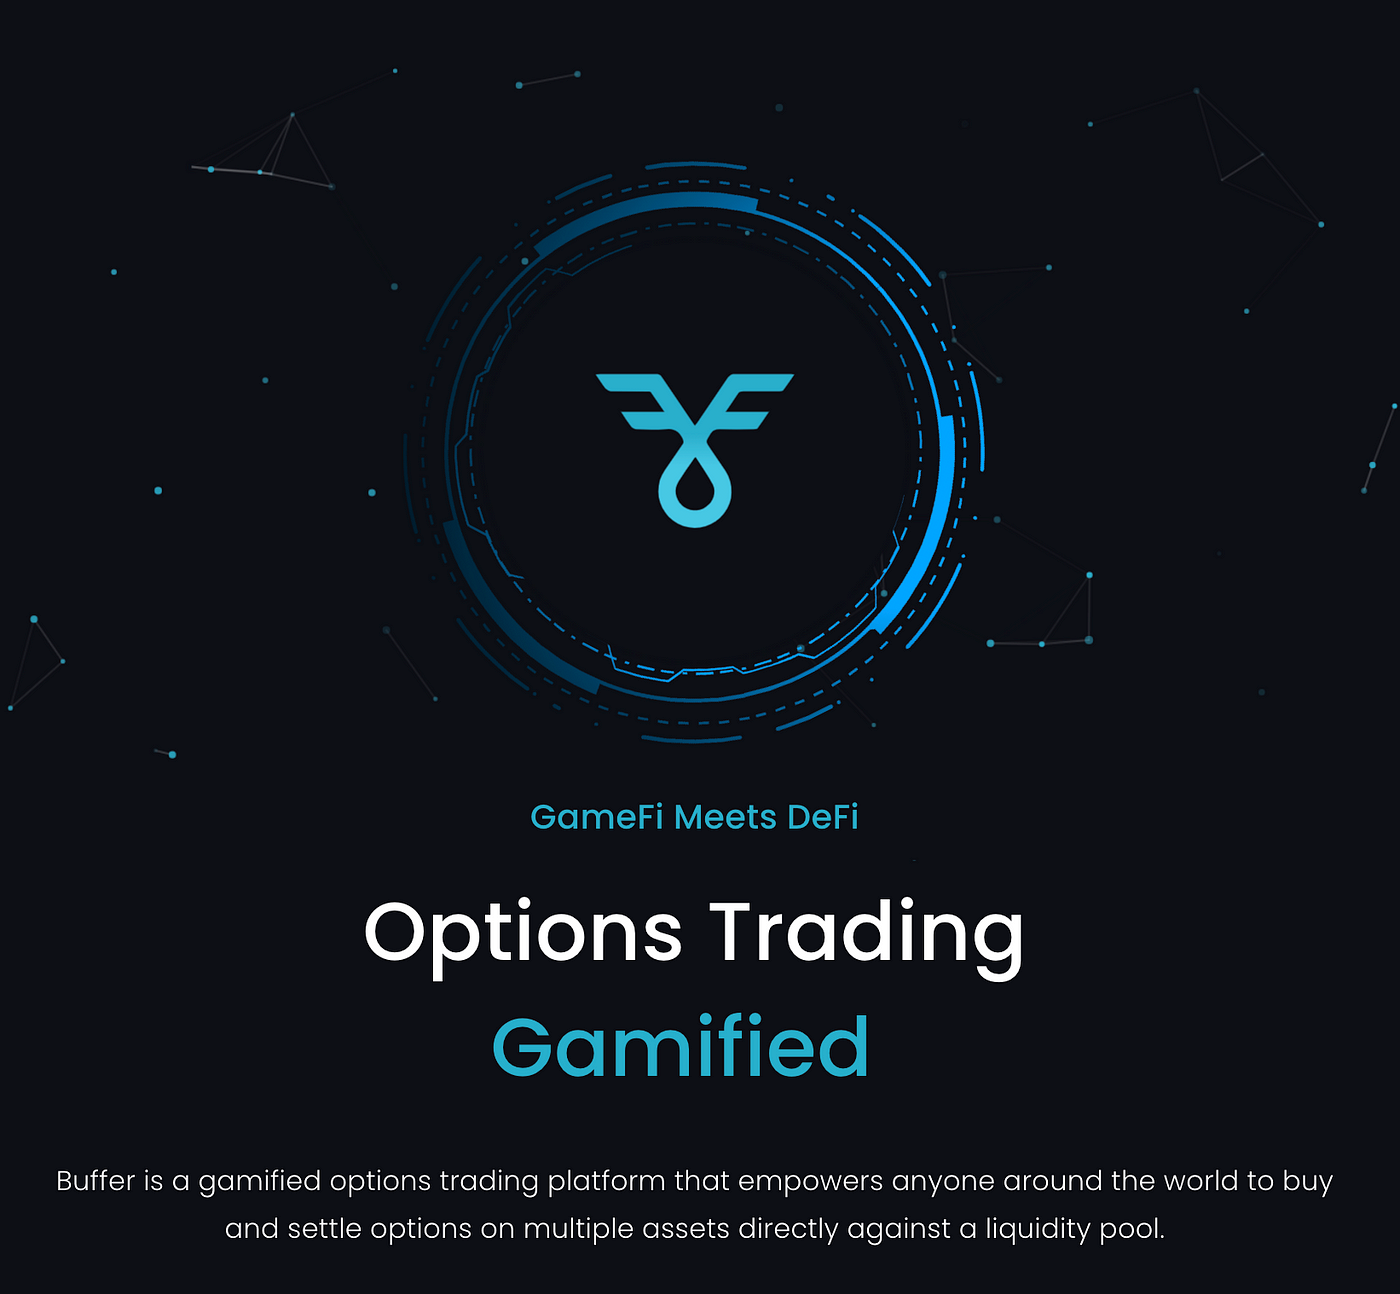 Buffer.Finance is the first Crypto Options Platform and has “gamified” options trading by simplifying the prediction and expiration principles for users.